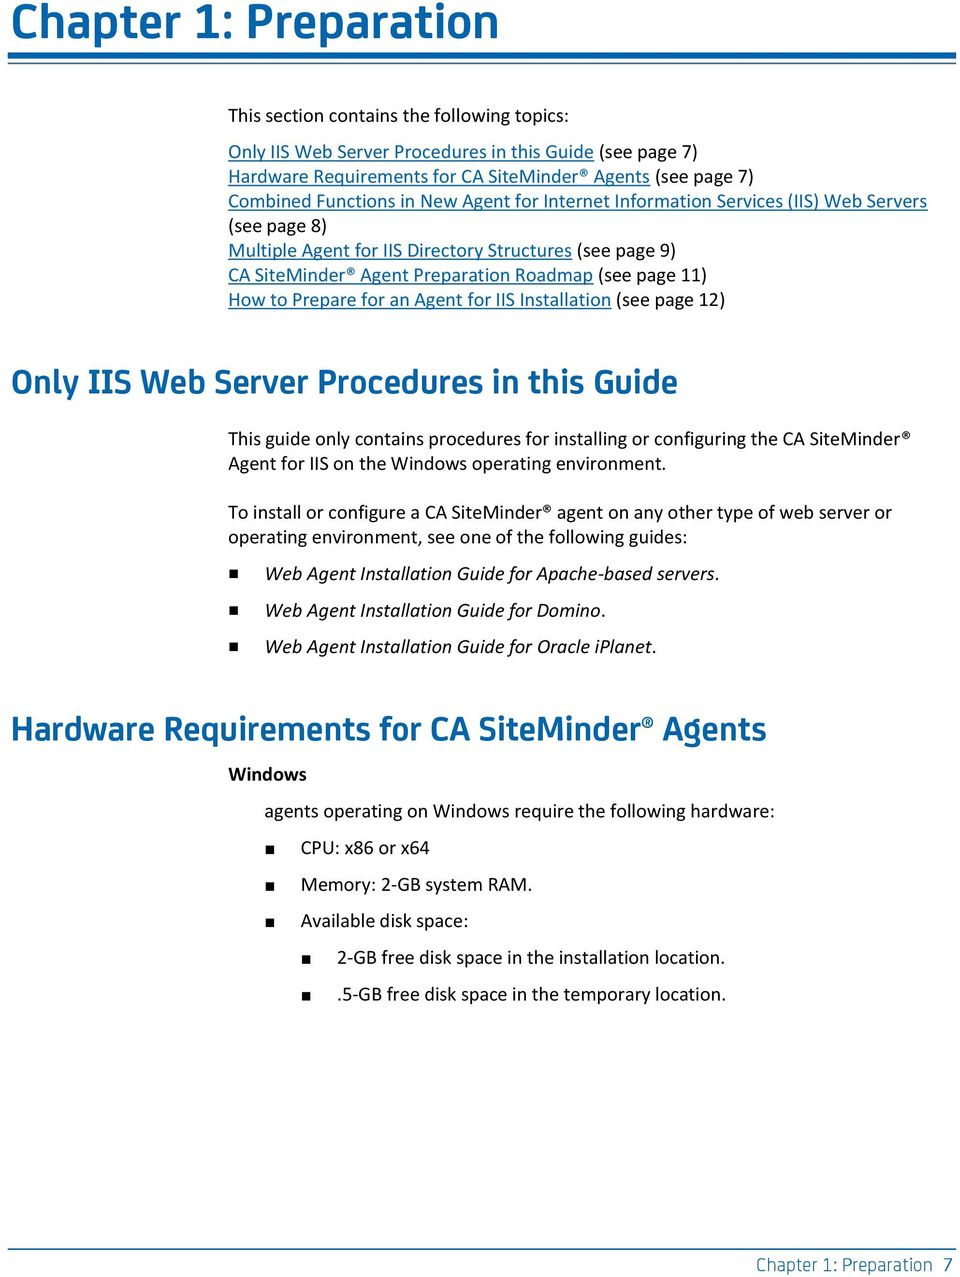 How to Prepare for an Agent for IIS Installation (see page 12) Only IIS Web Server Procedures in this Guide This guide only contains procedures for installing or configuring the CA SiteMinder Agent